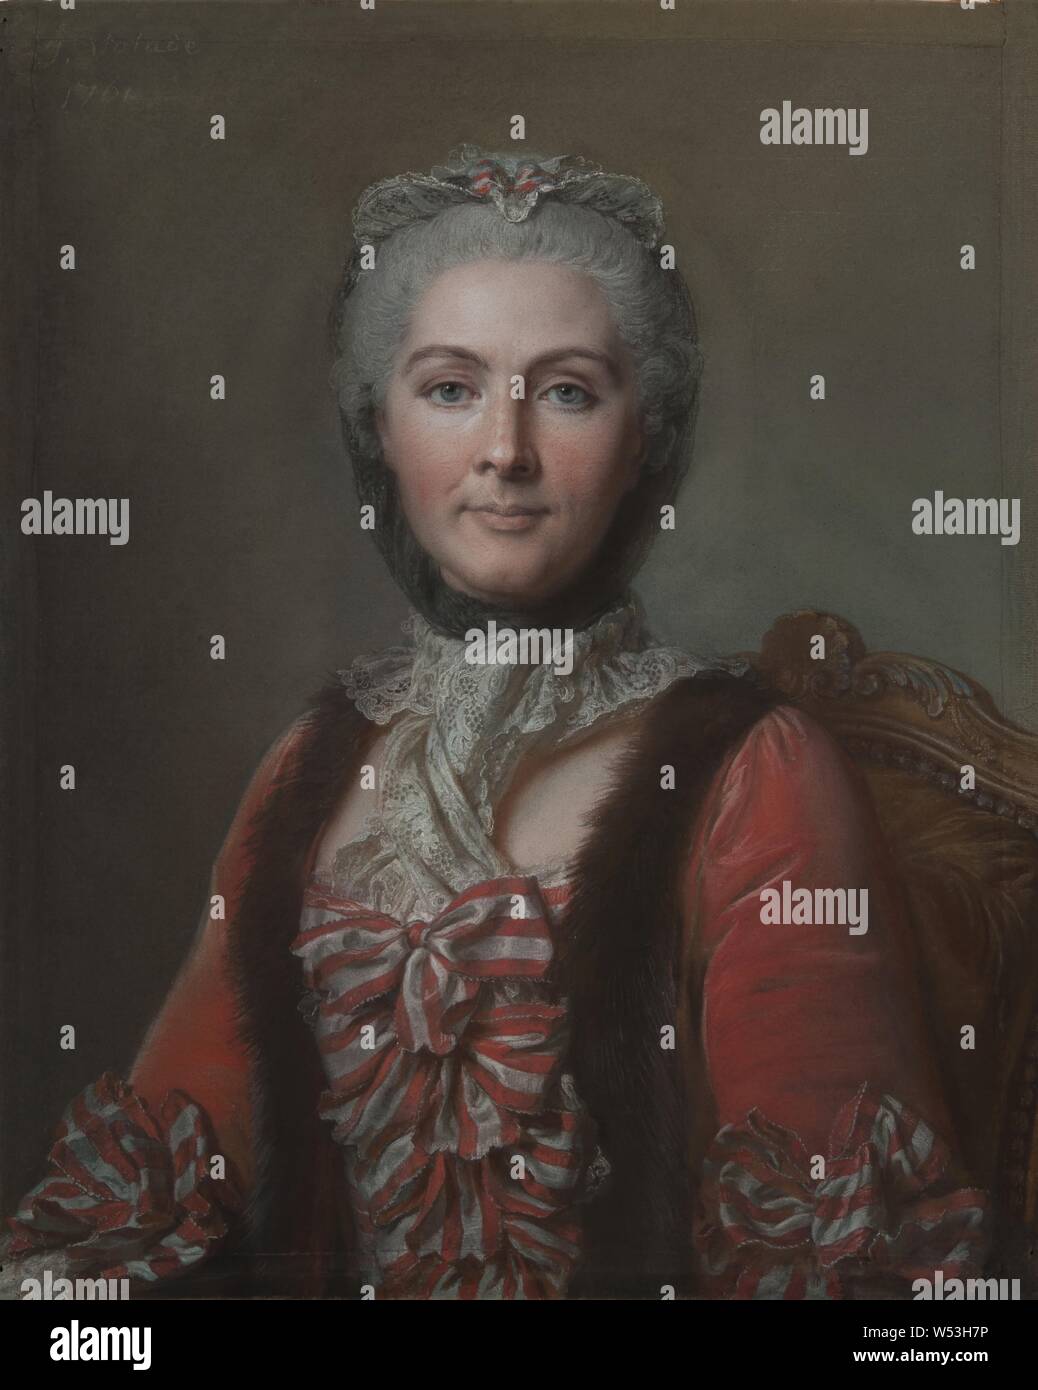 Jean Valade, Marie-Sophie de Courcillon, unknown woman, called Marie Baudard de Sainte-James (1742-1782), g.m, Jean-Maurice Faventines de Fontenille, painting, 1761, Pastel on paper, Height, 63 cm (24.8 inches), Width, 52.3 cm (20.5 inches), Signed, J. Valade /, top left, in white Stock Photo